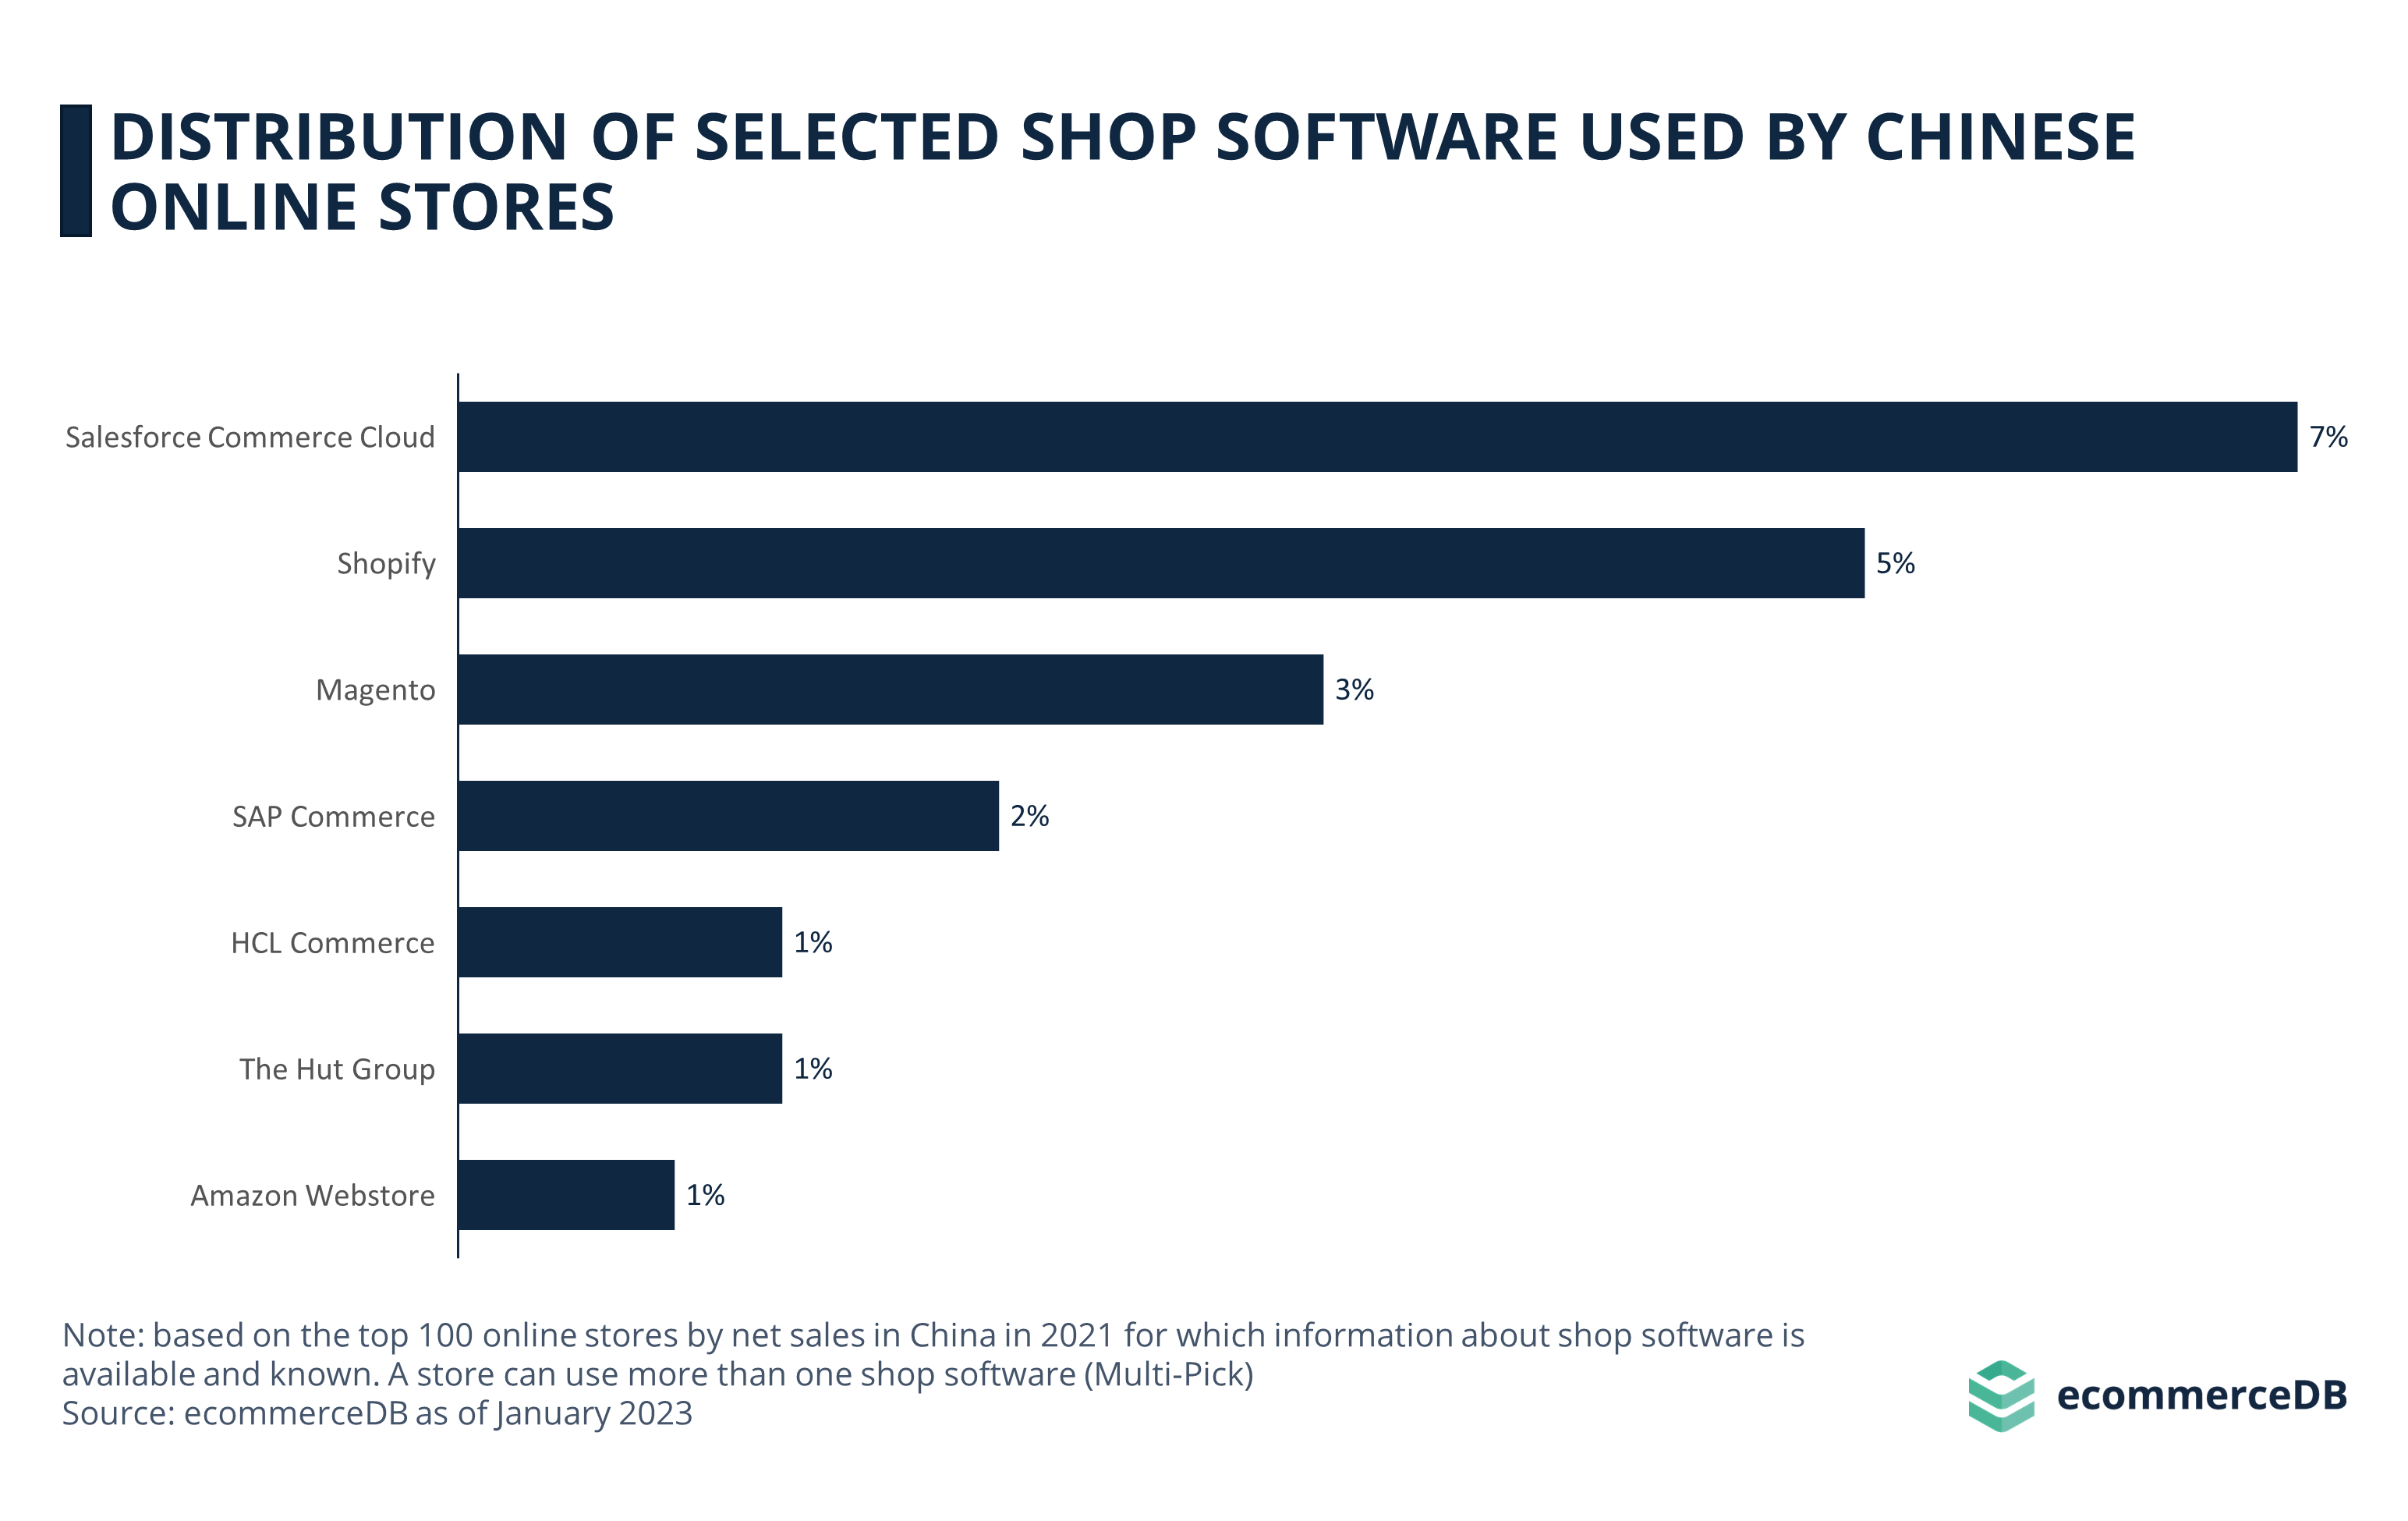 Distribution of Selected Shop Software Used by Chinese Online Stores